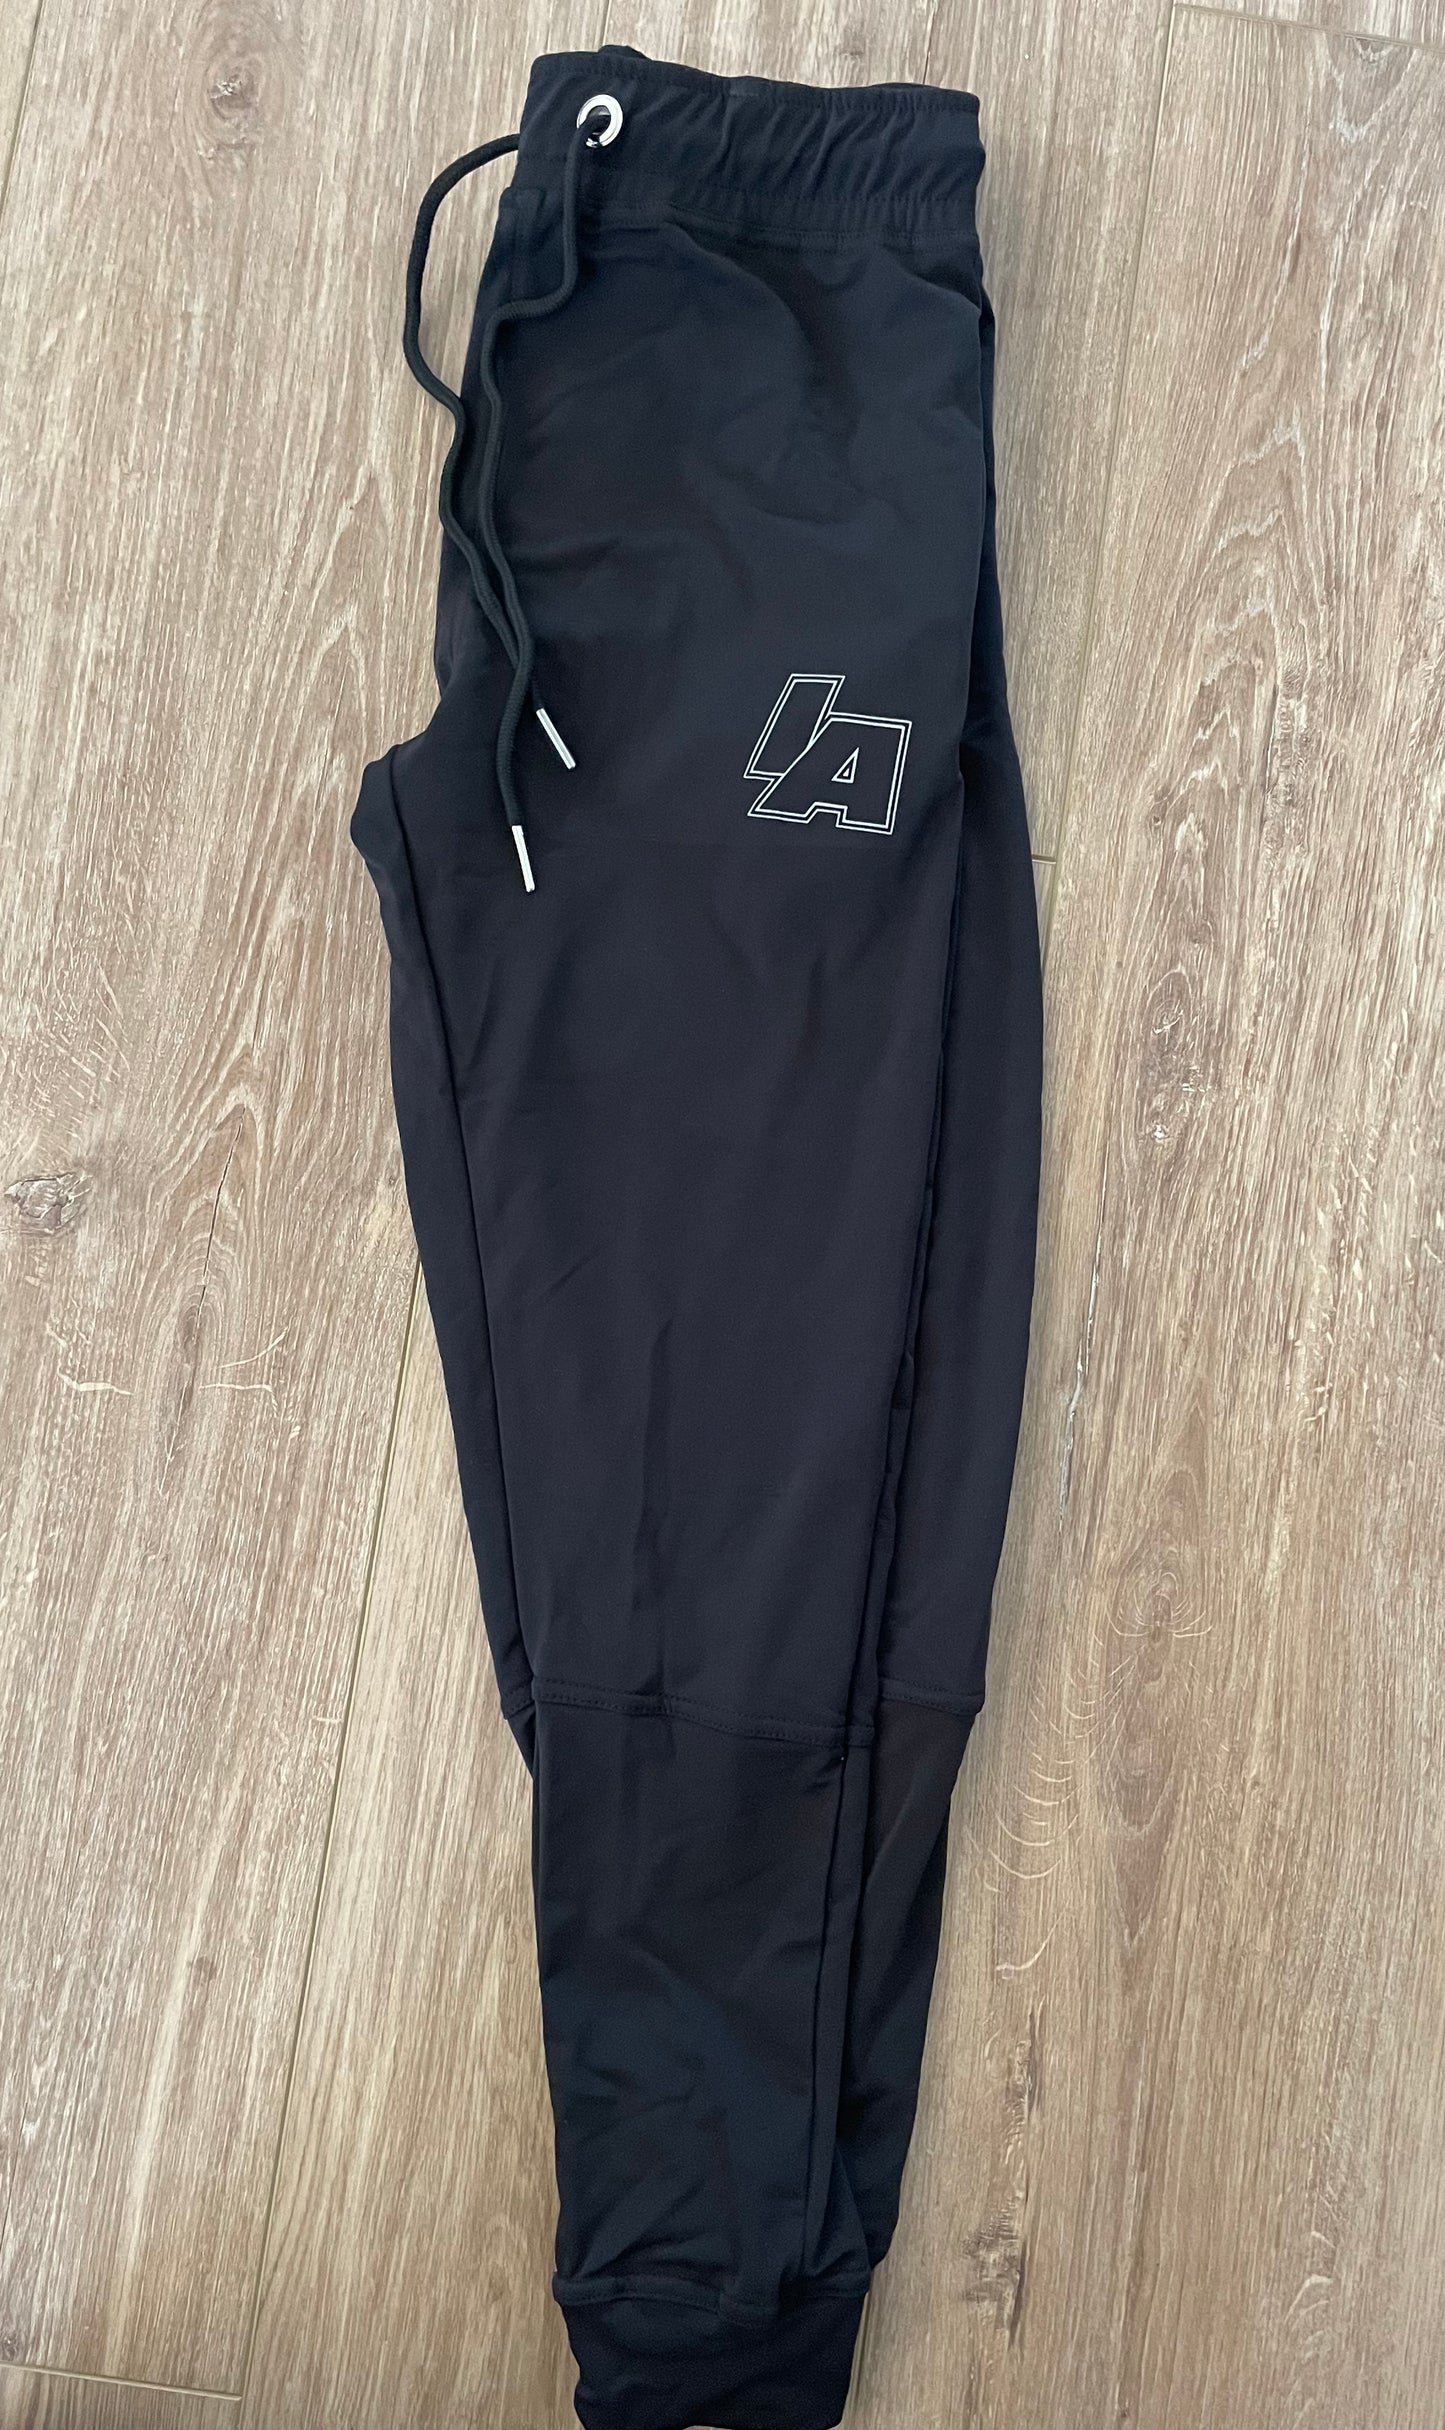 IAwrestle Adult/Youth Joggers